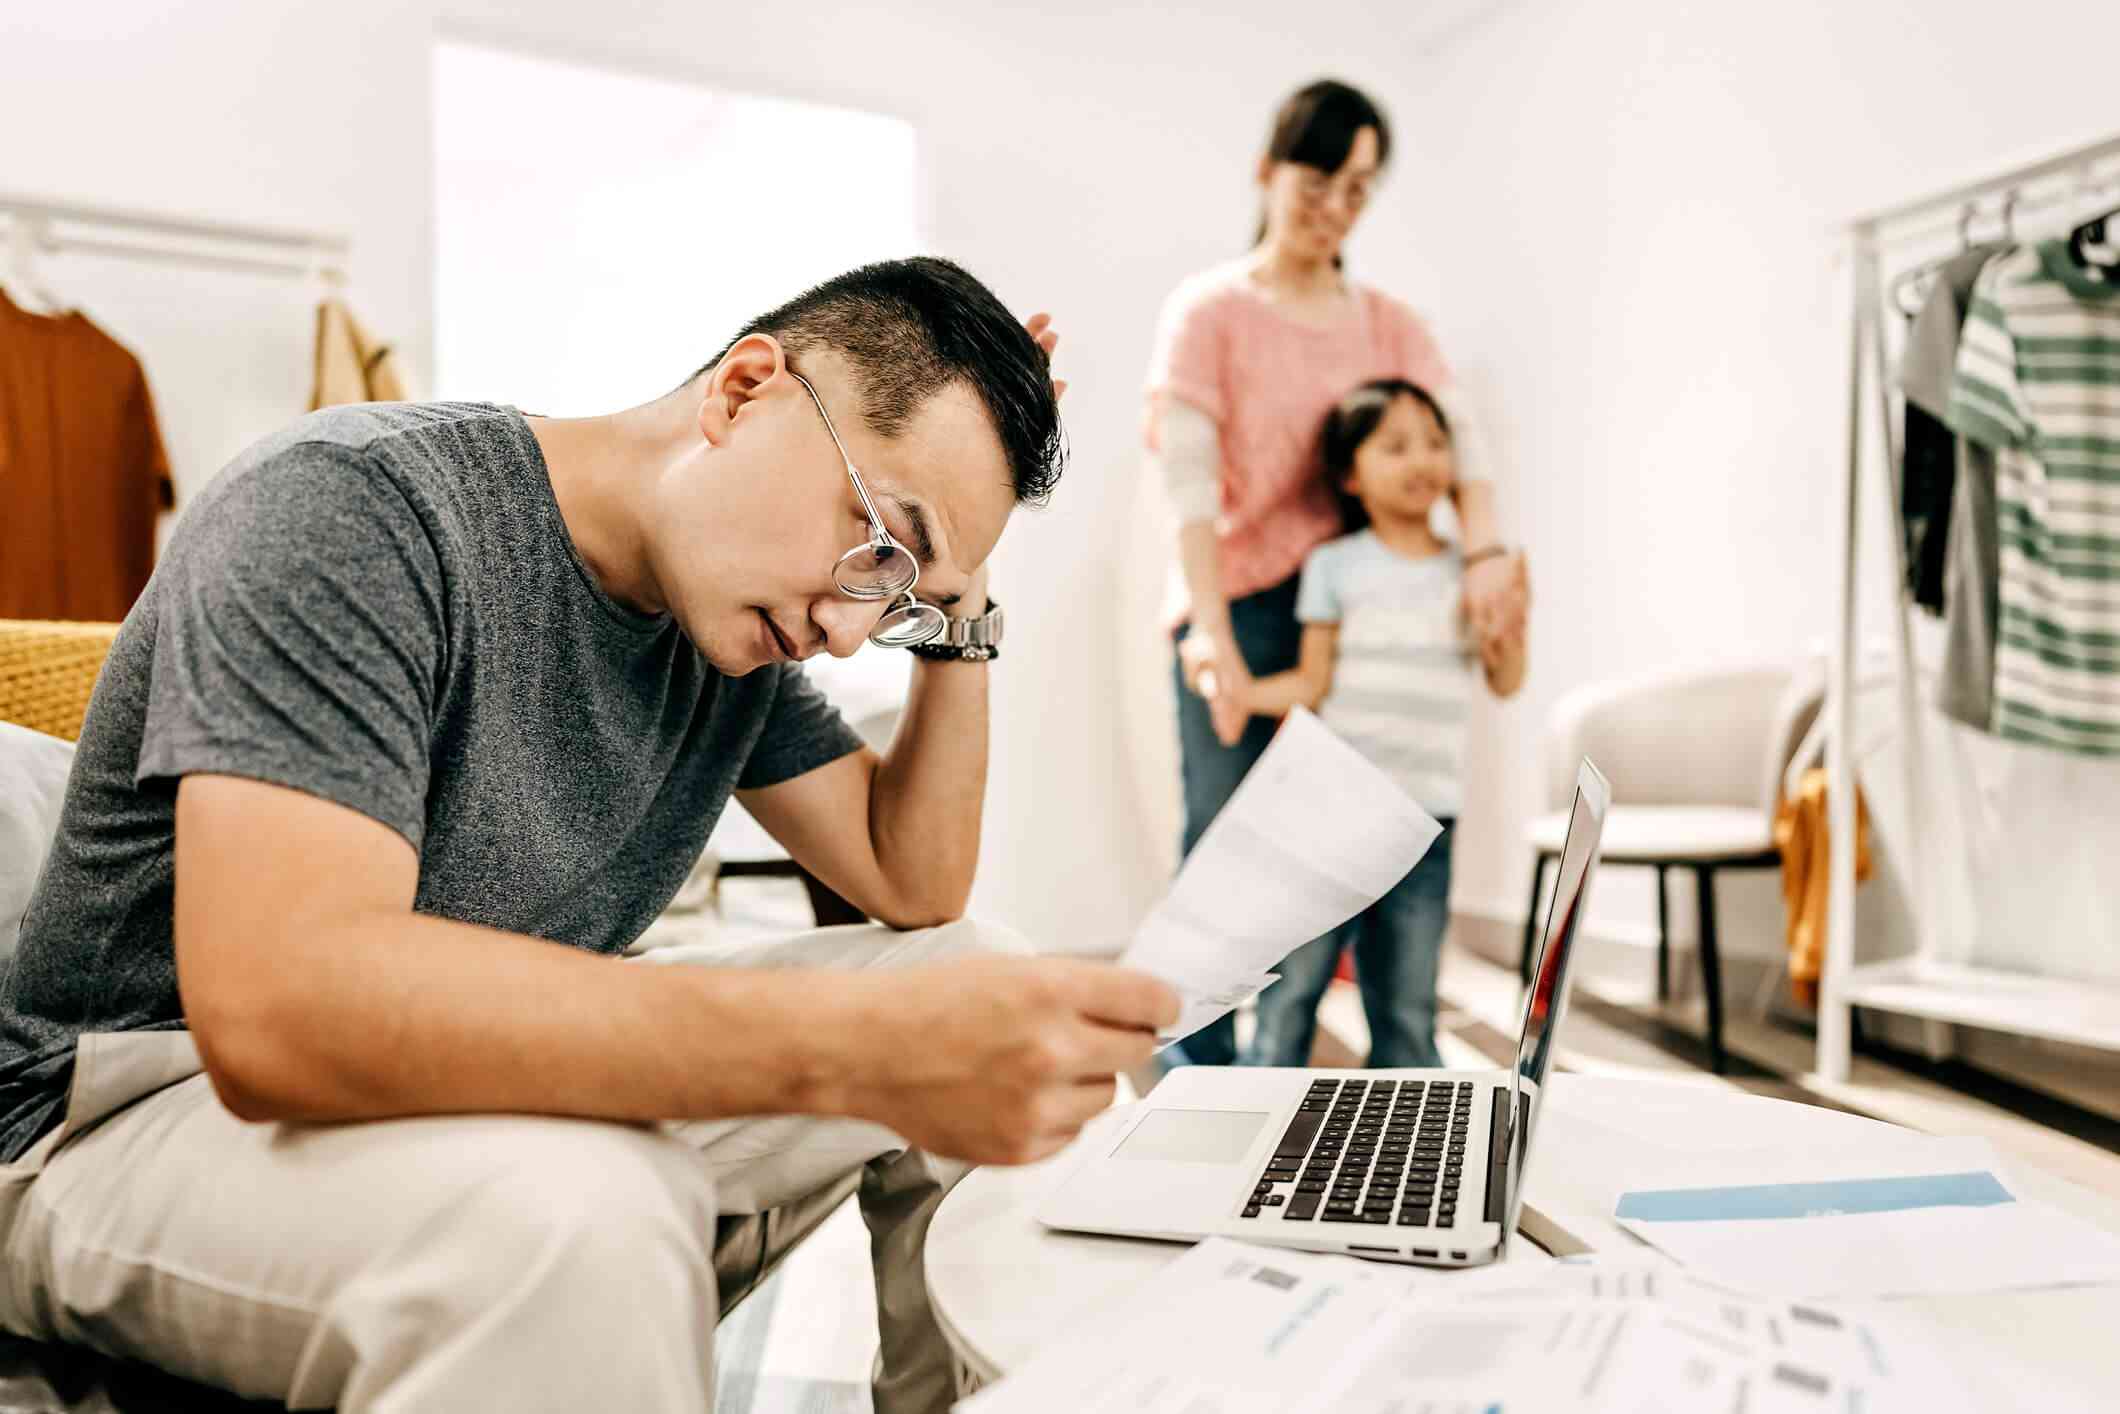 A man wearing glasses looks stressed as he sits on the couch with his laptop open infront of him and looks at some papers as his wife and child stand in the background.